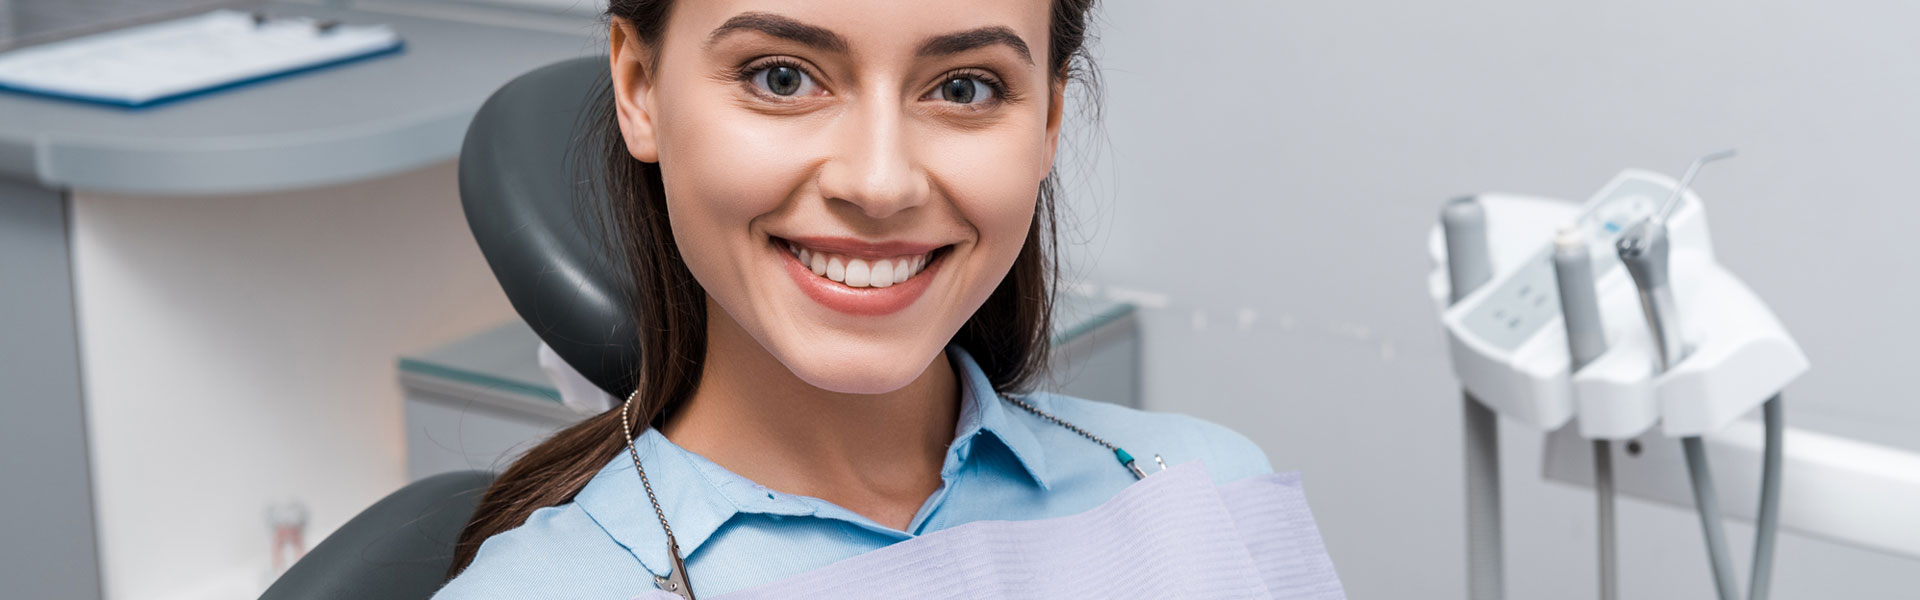 Smiling young woman sitting on dental chair